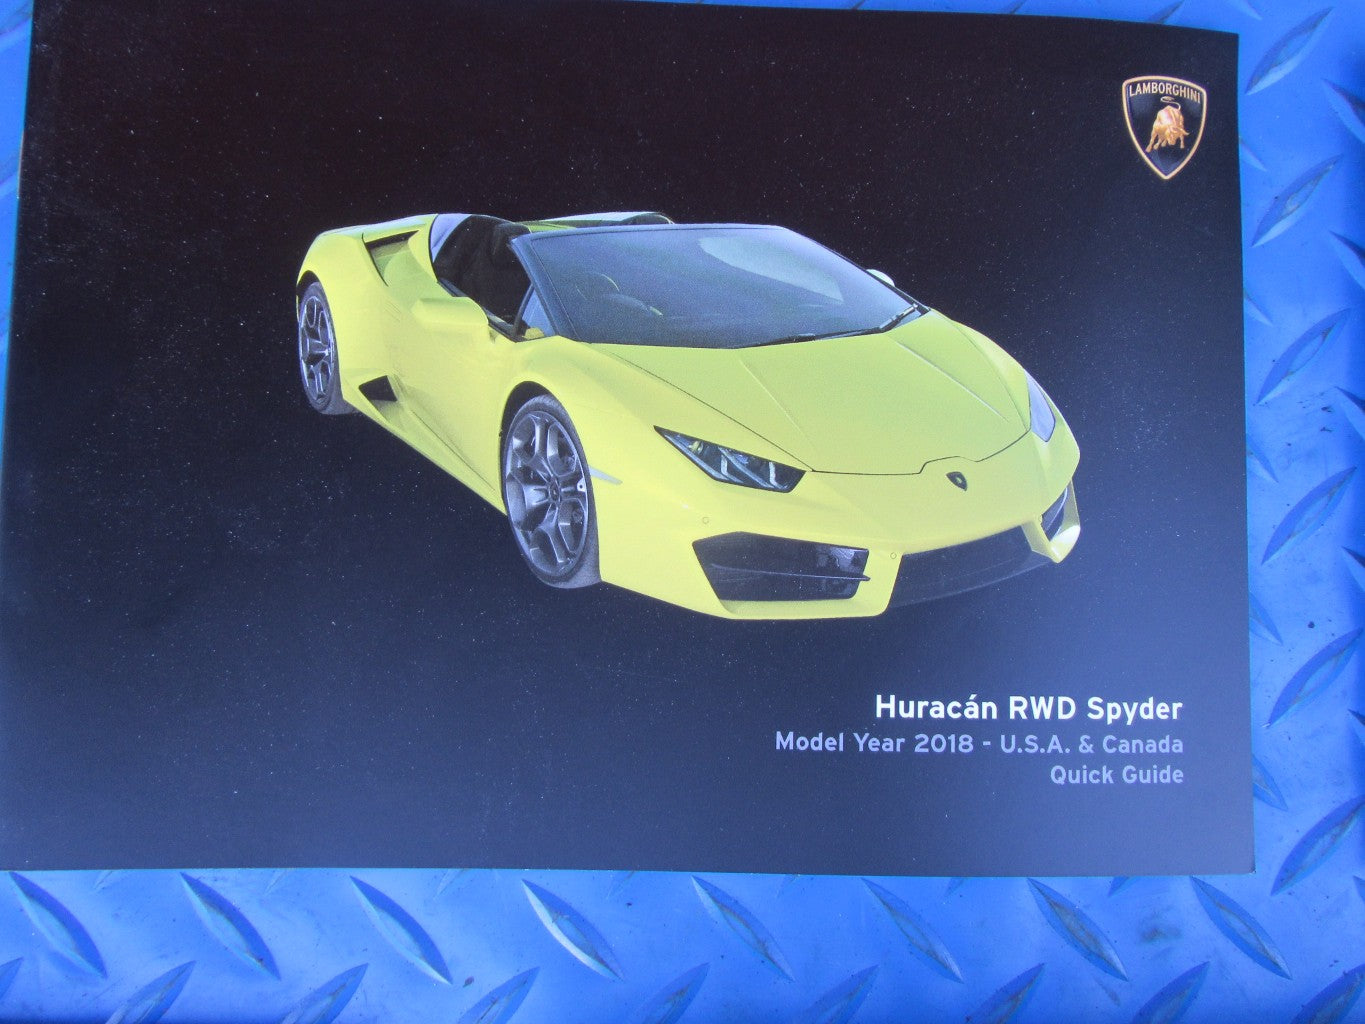 Lamborghini Huracan Spyder RWD owners manuals booklets with pouch #2853